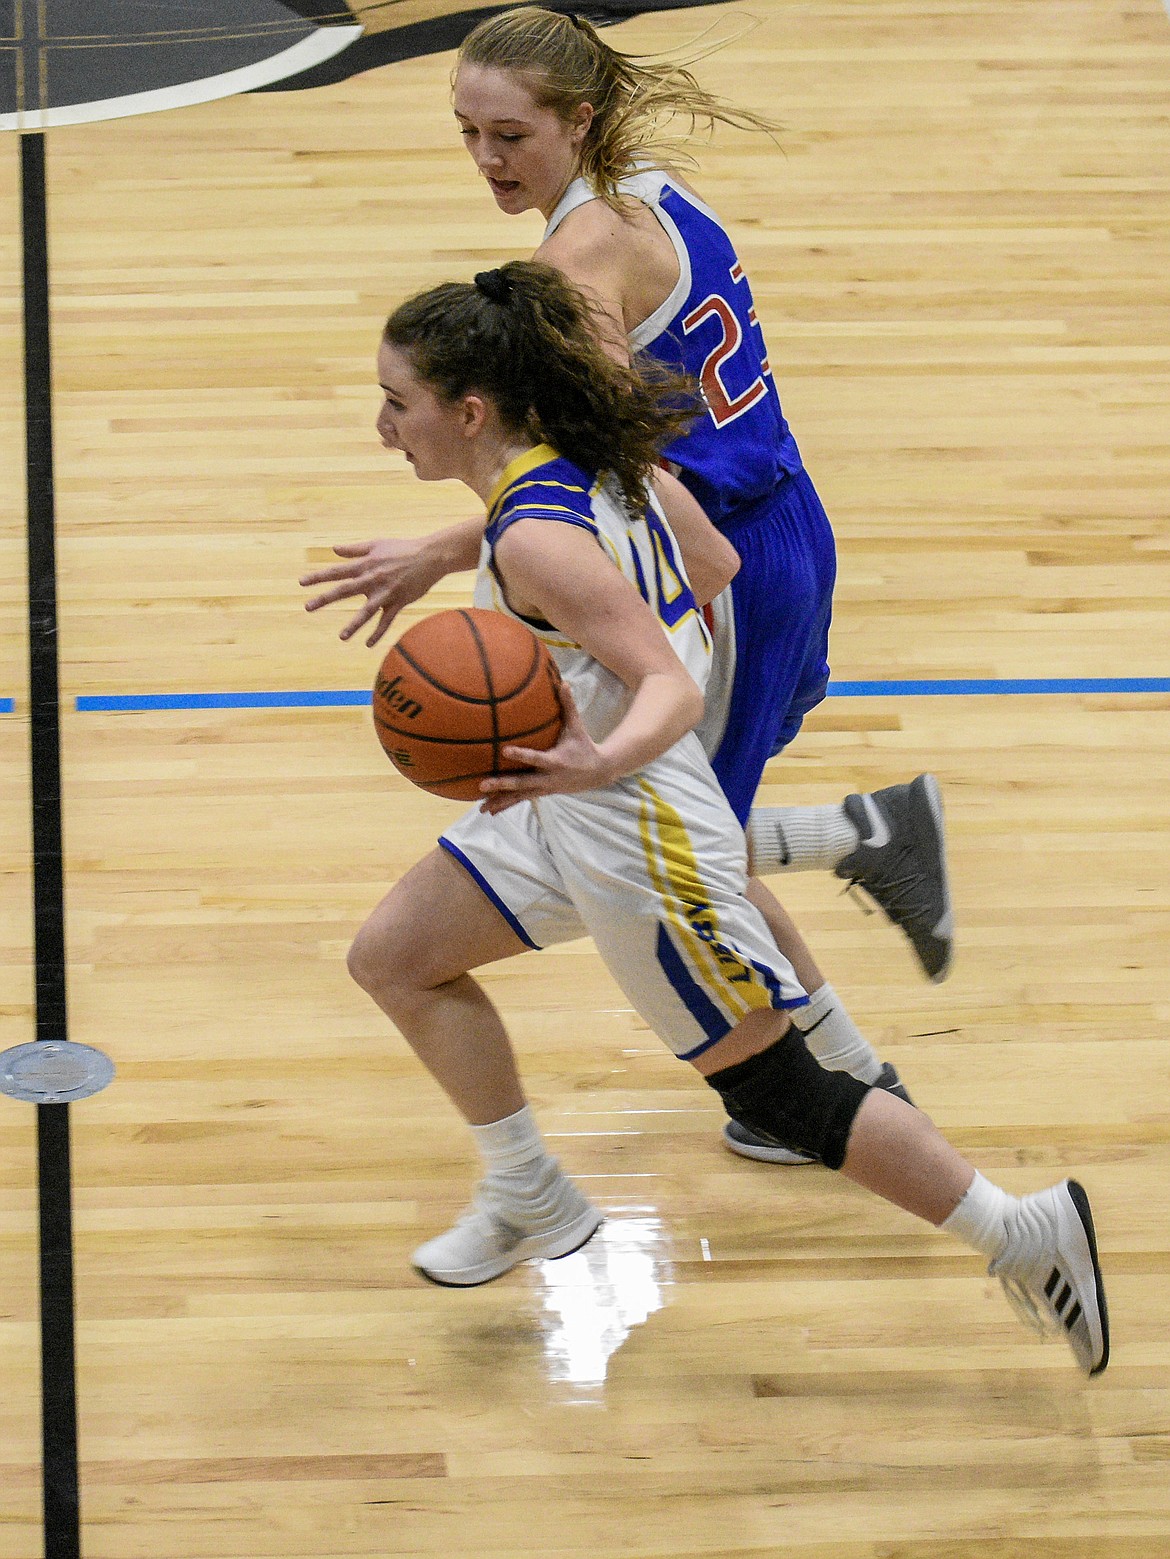 Libby senior Emma Gruber drives down court to shoot for three after picking up the rebound during the third quarter Friday. (Ben Kibbey/The Western News)